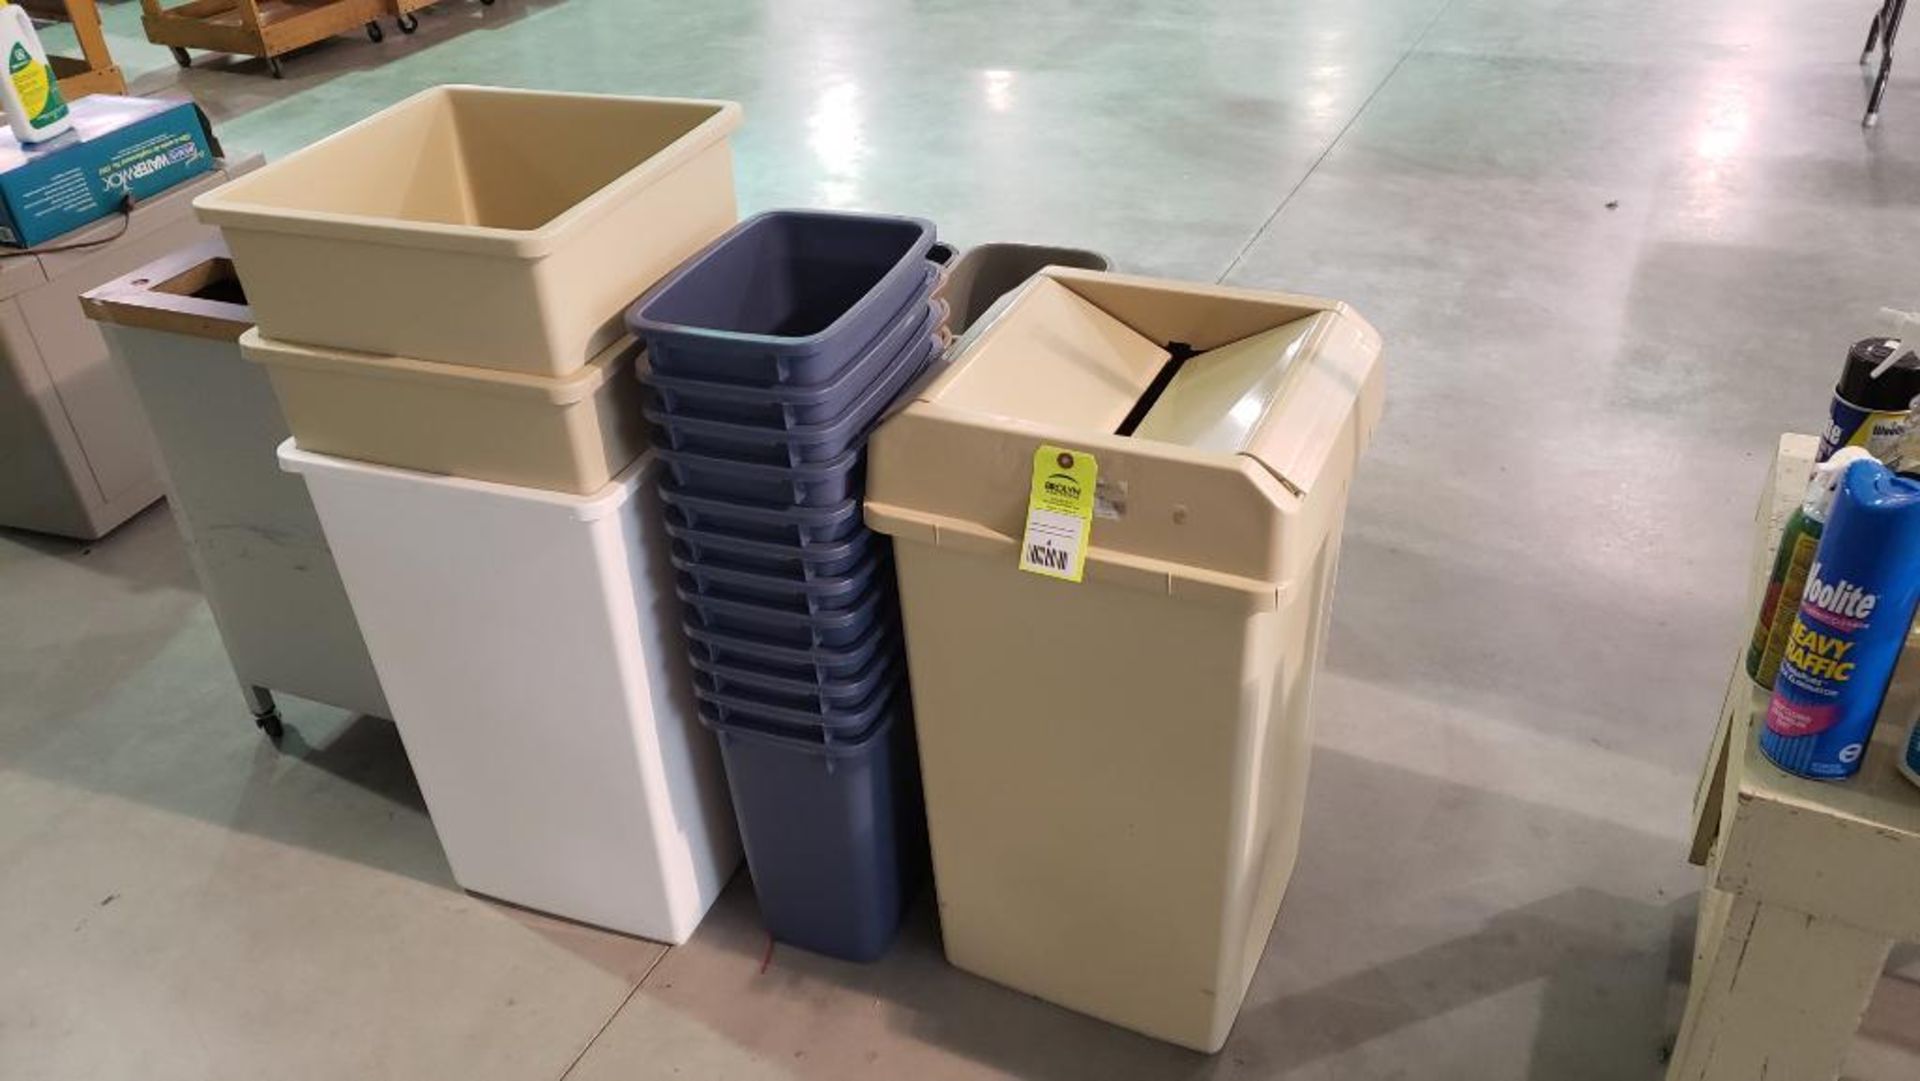 Assorted trash cans.